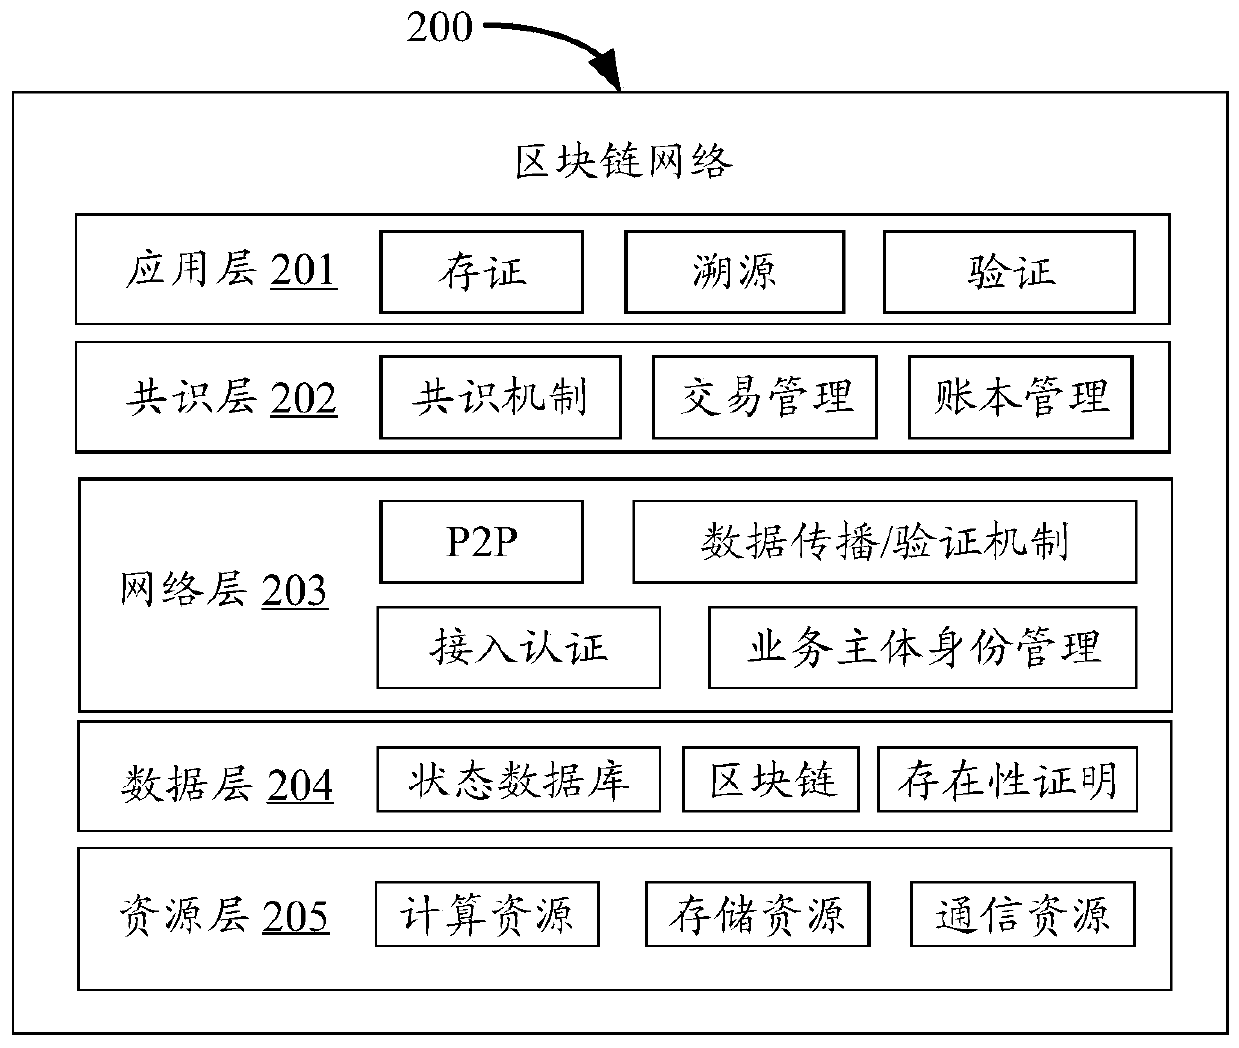 Student identity information processing method and device based on block chain network